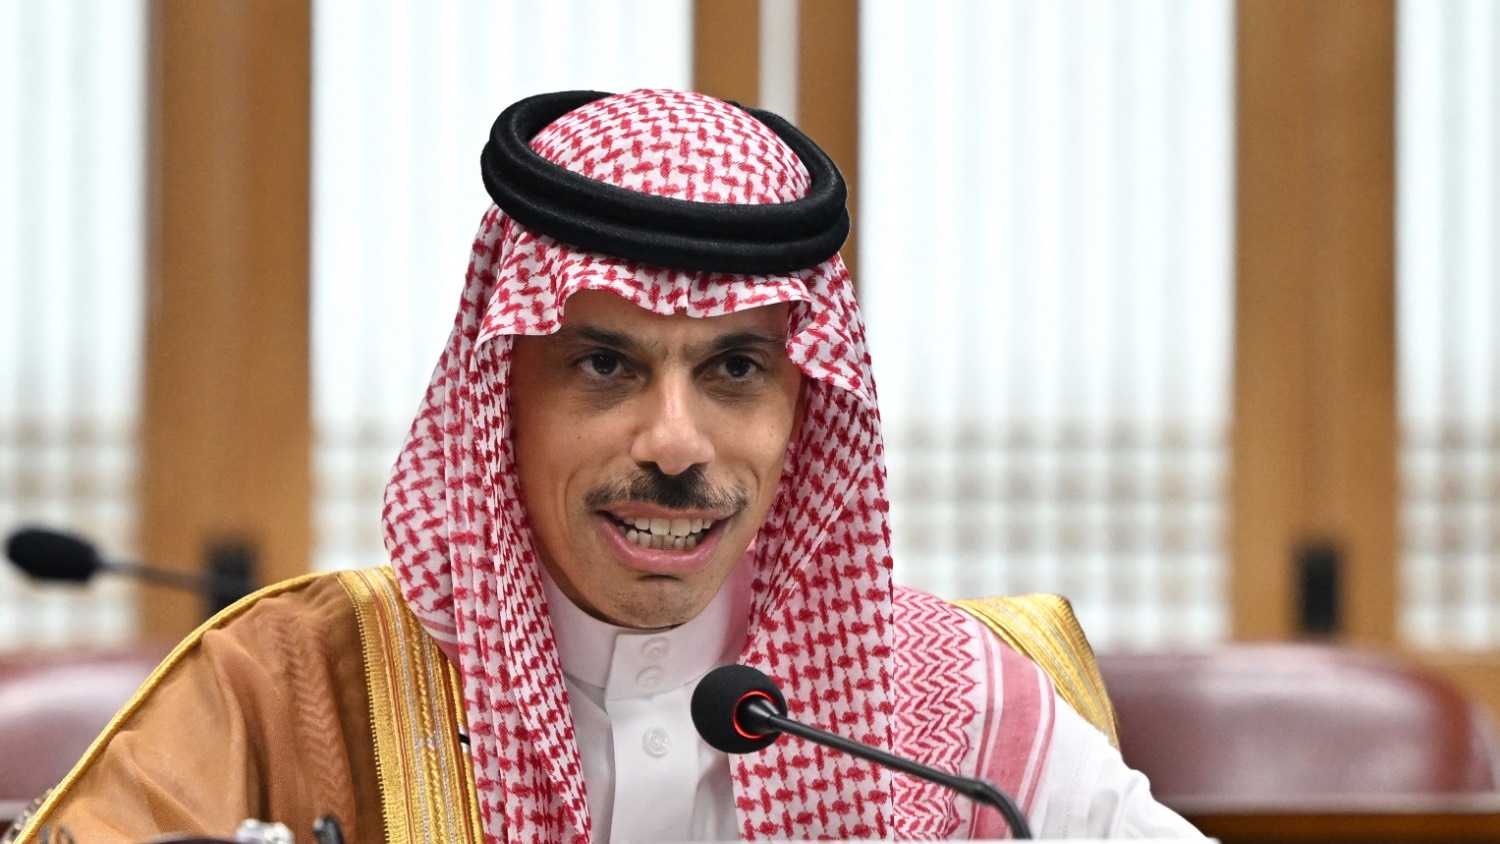 The statement from the Saudi foreign ministry rejected the notion that Opec's oil cuts aligned Riyadh with Russia.